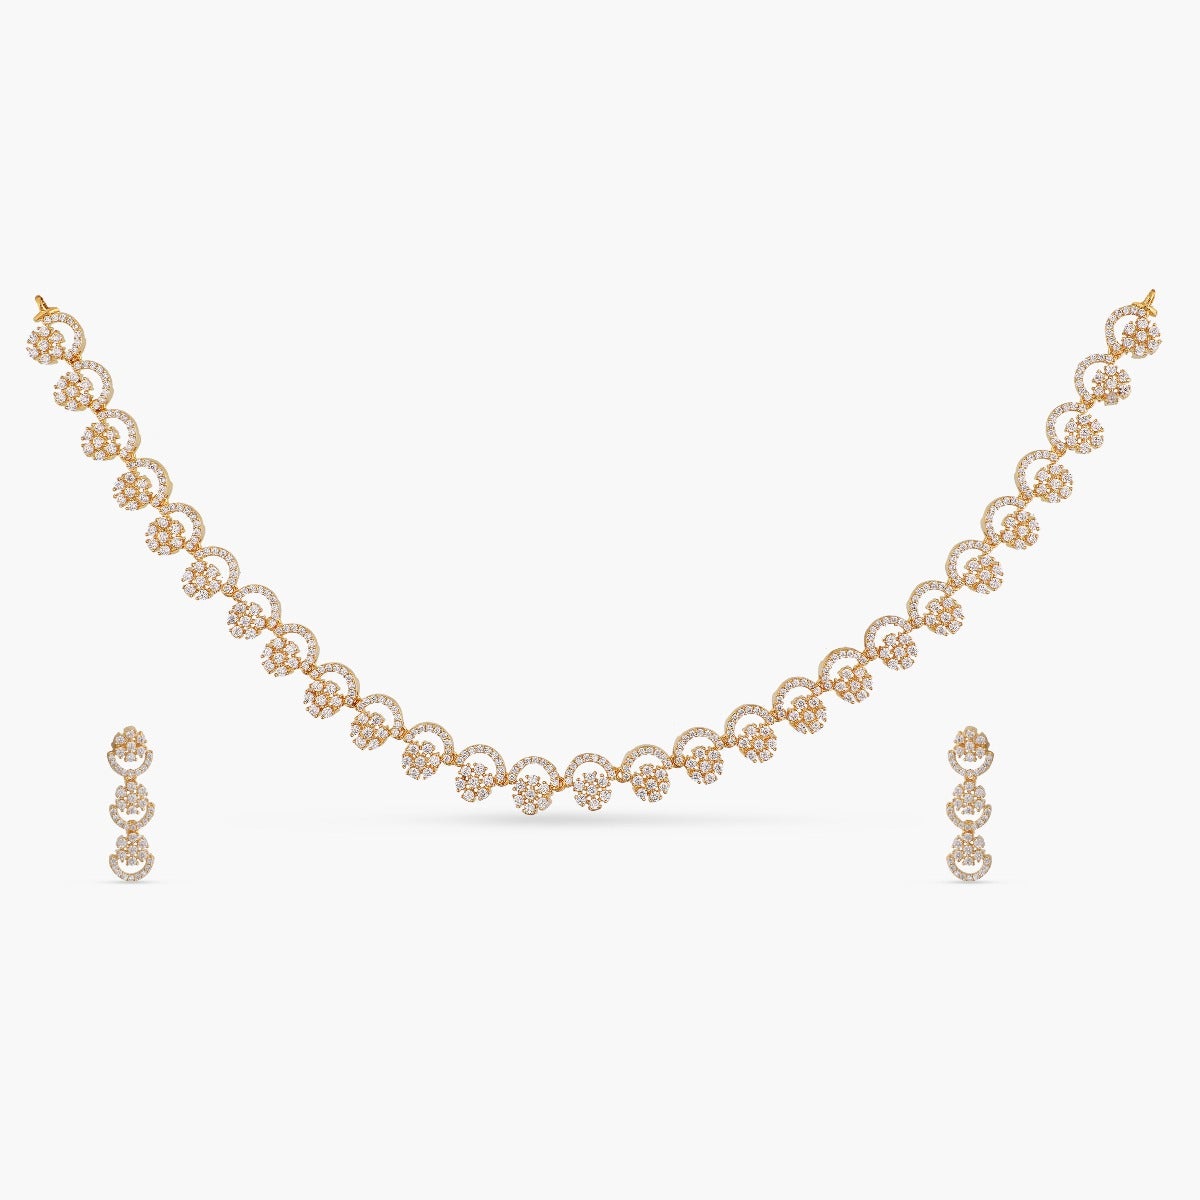 Stunning Delicate CZ Necklace Set